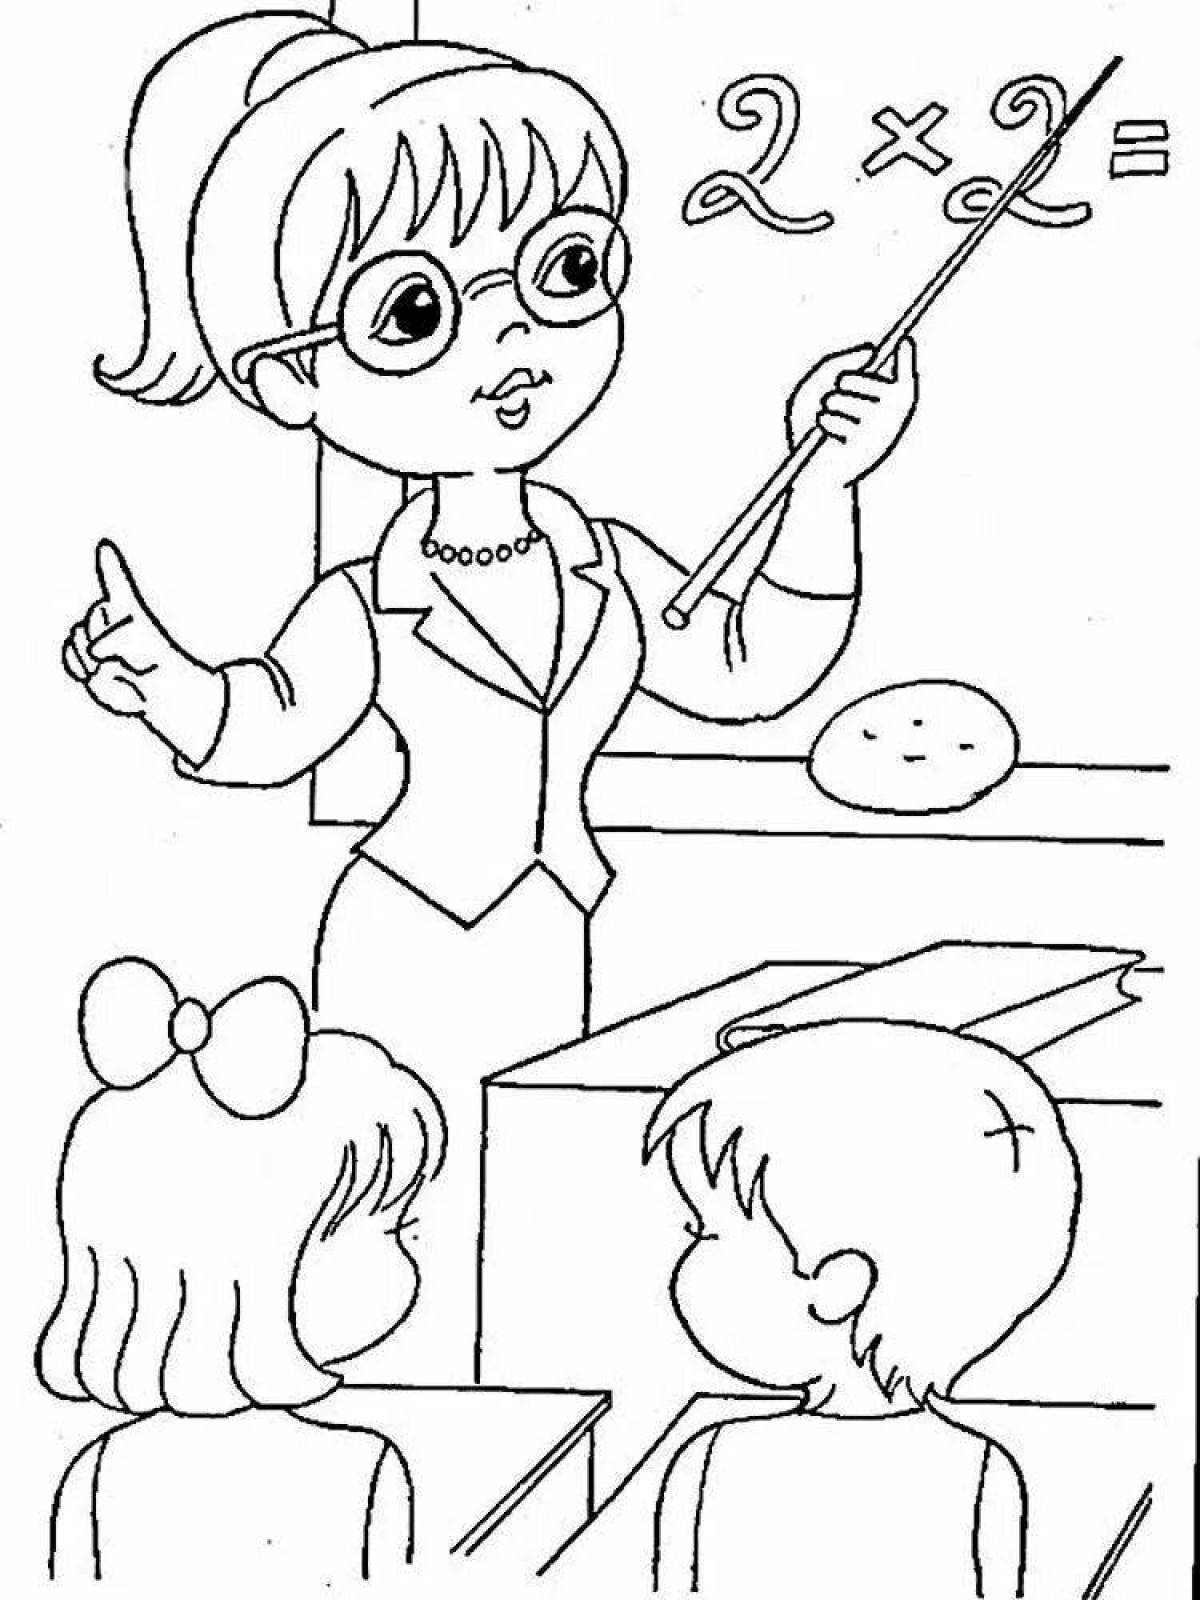 Coloring page cheerful doctor